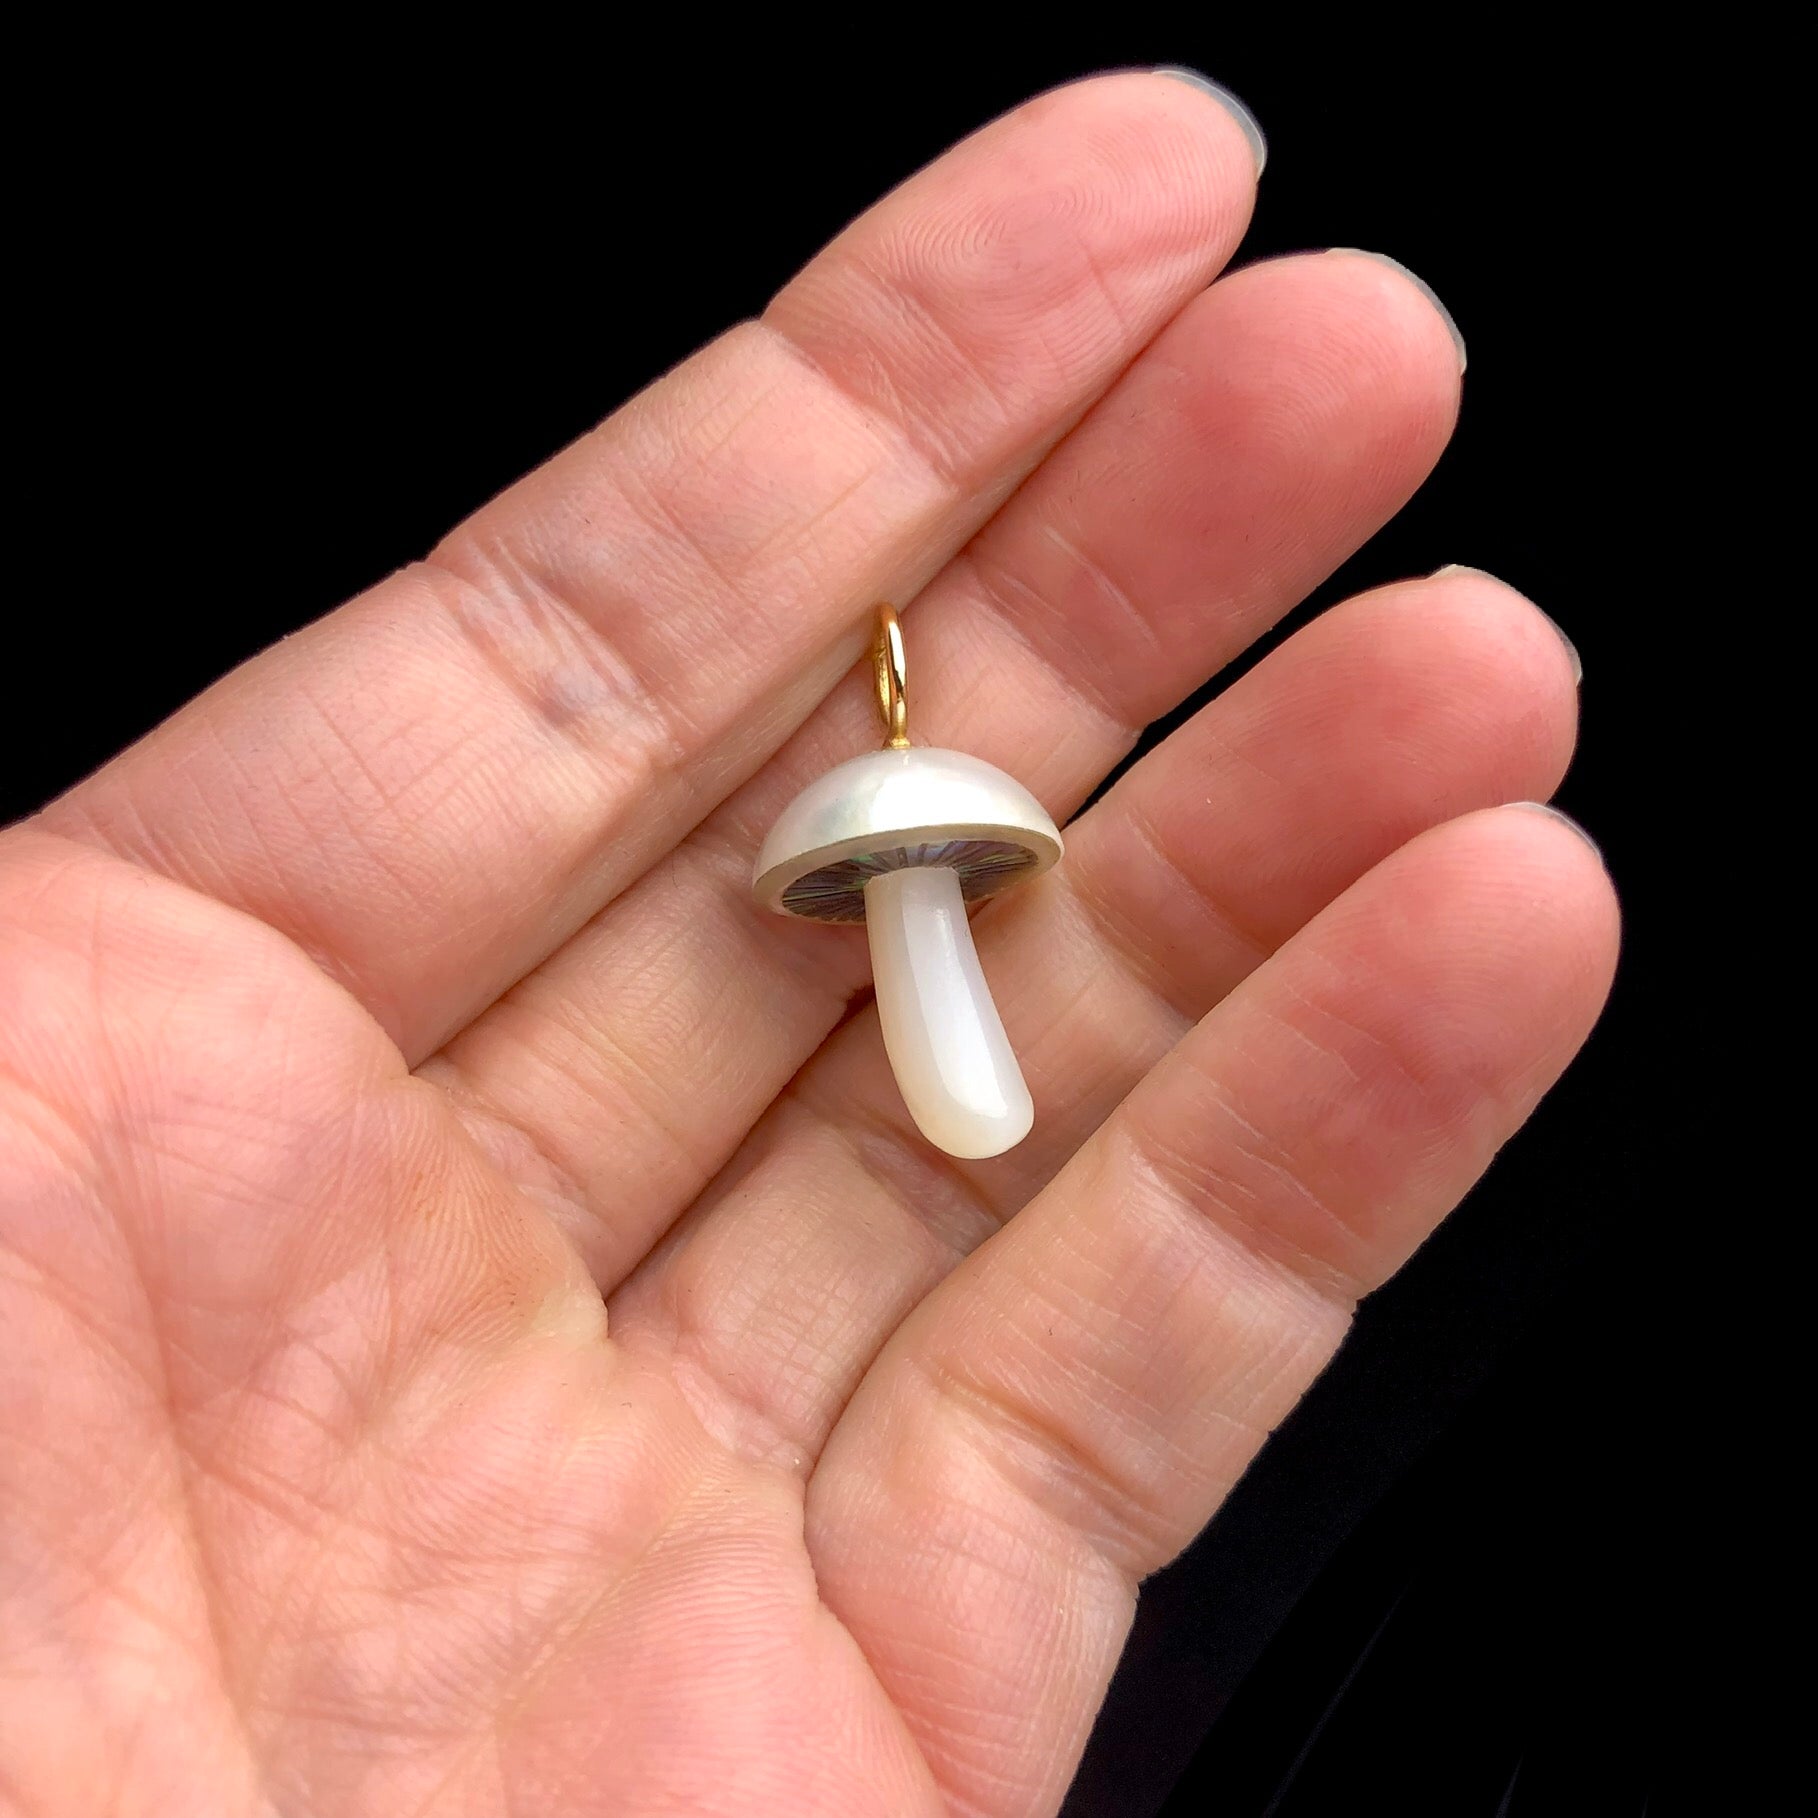 Mother of Pearl Mushroom Charm shown in hand